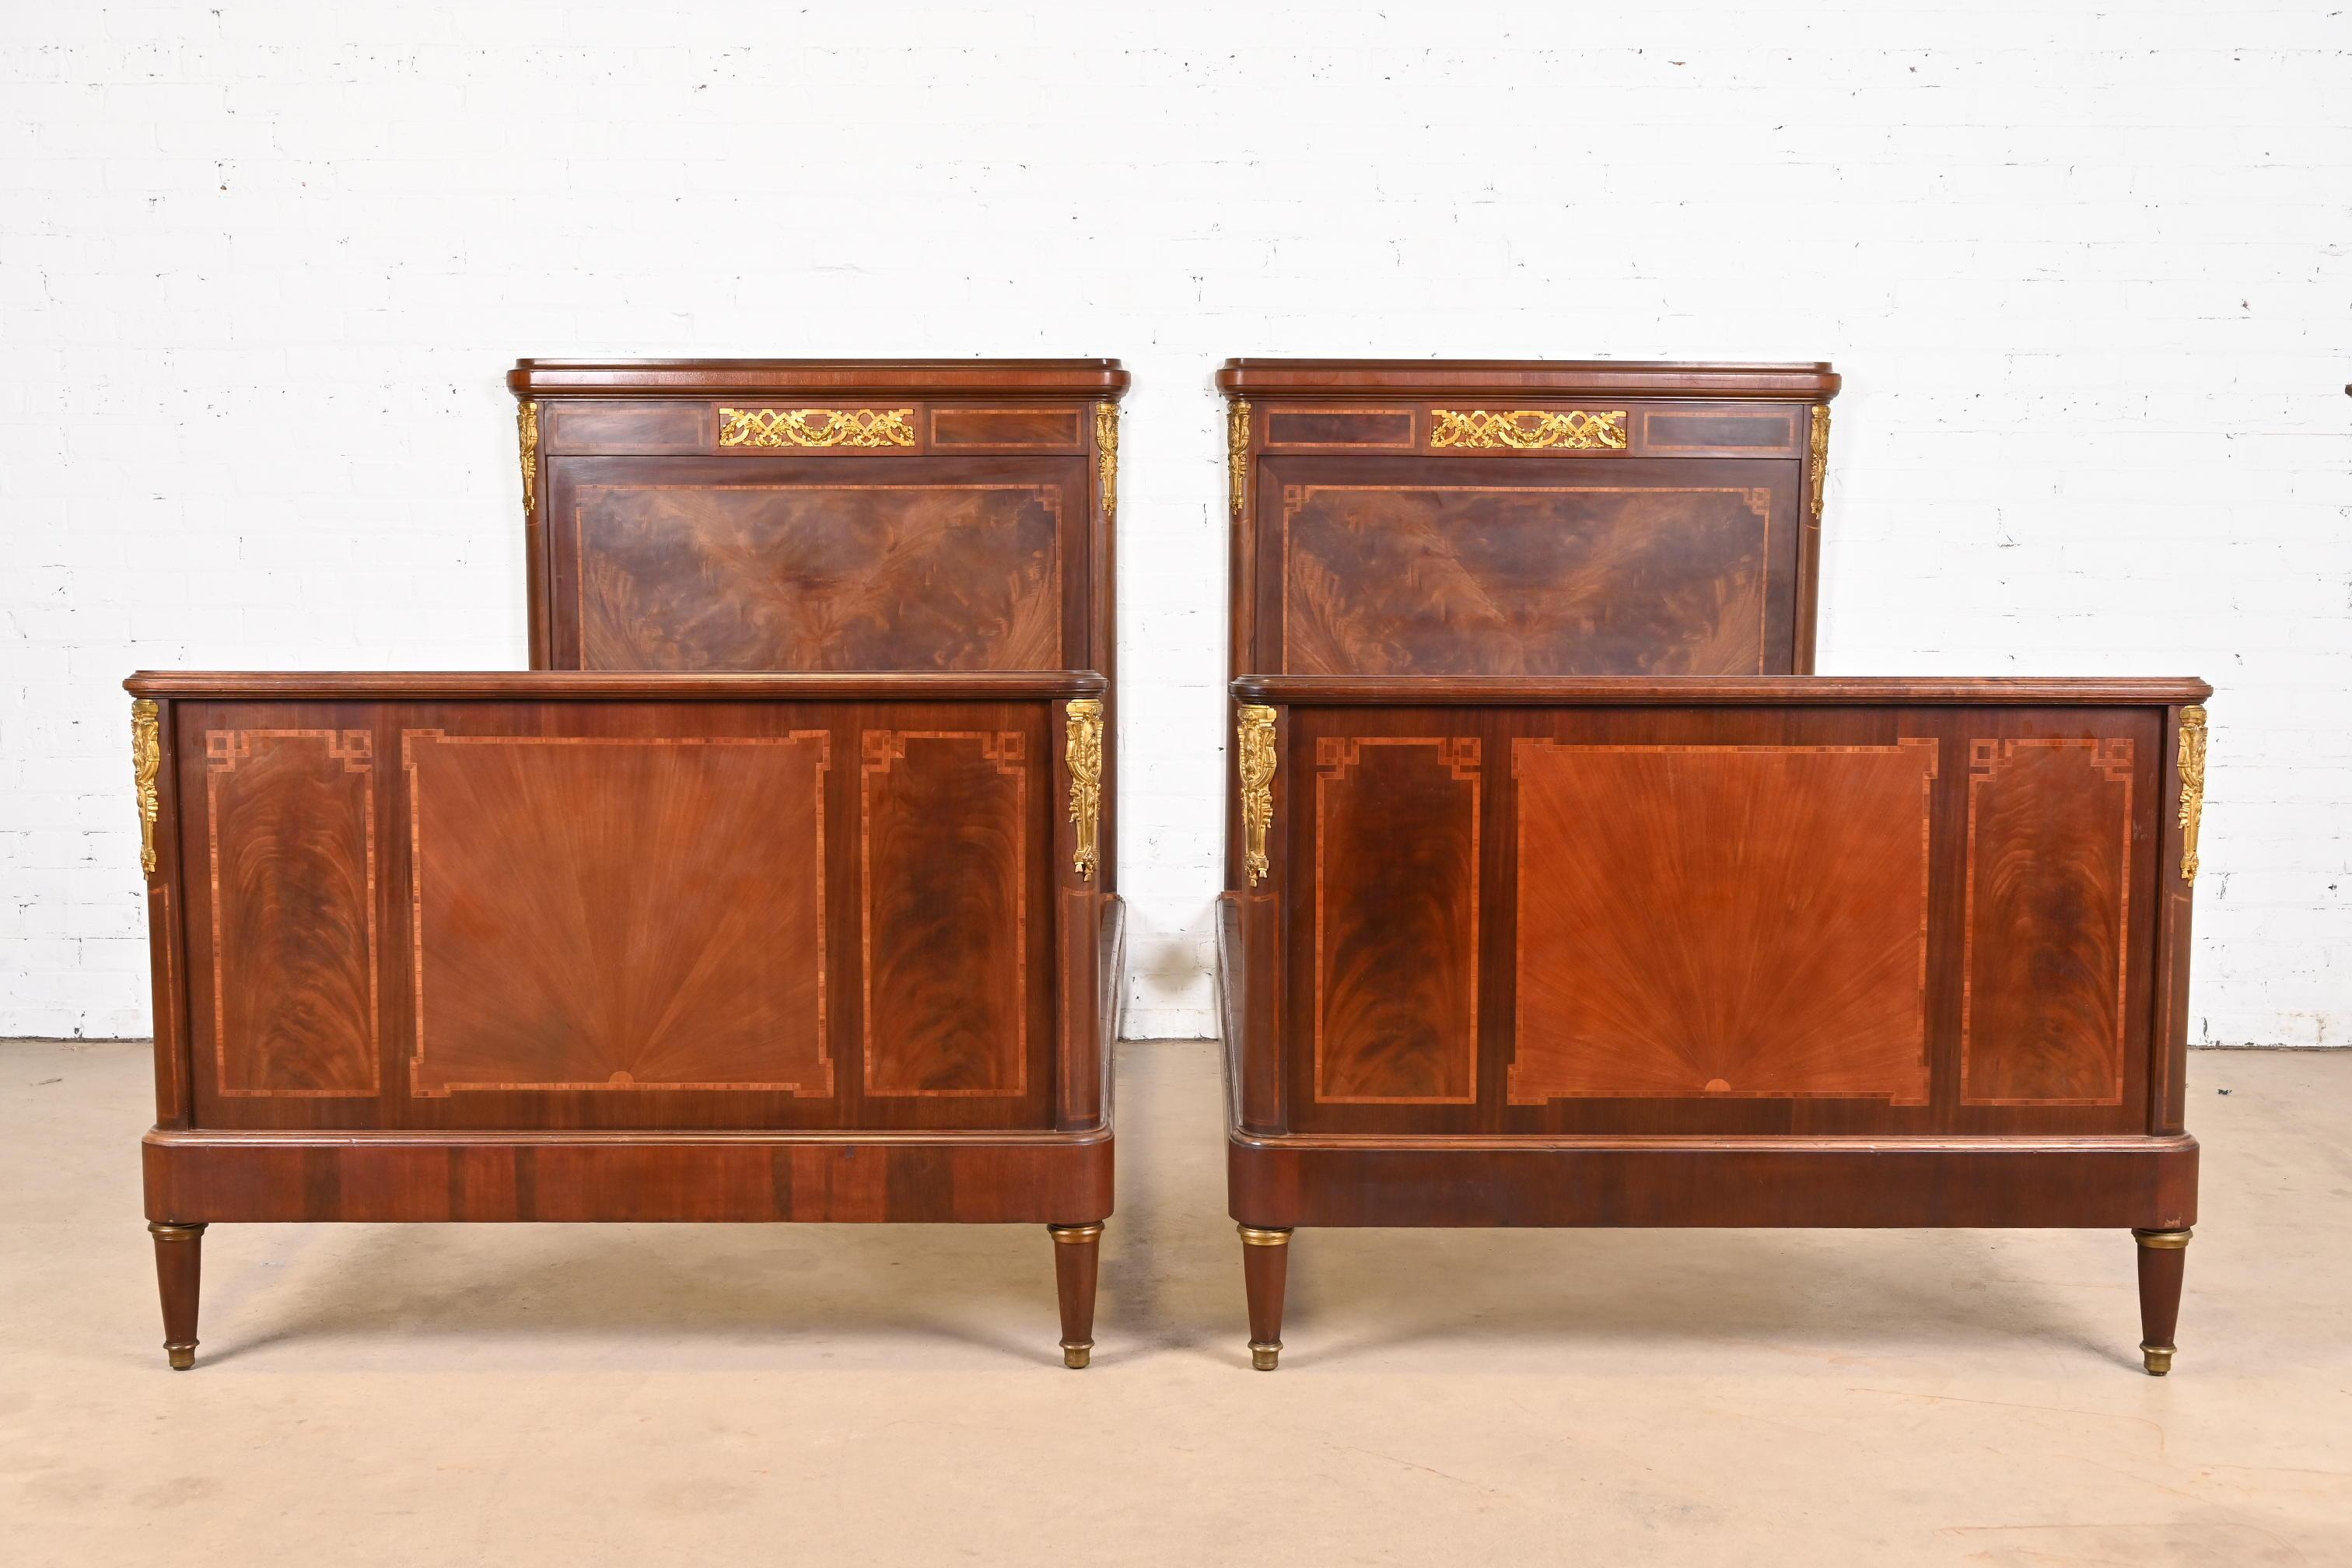 Antique French Regency Louis XVI Inlaid Flame Mahogany Bronze Mounted Twin Beds In Good Condition For Sale In South Bend, IN